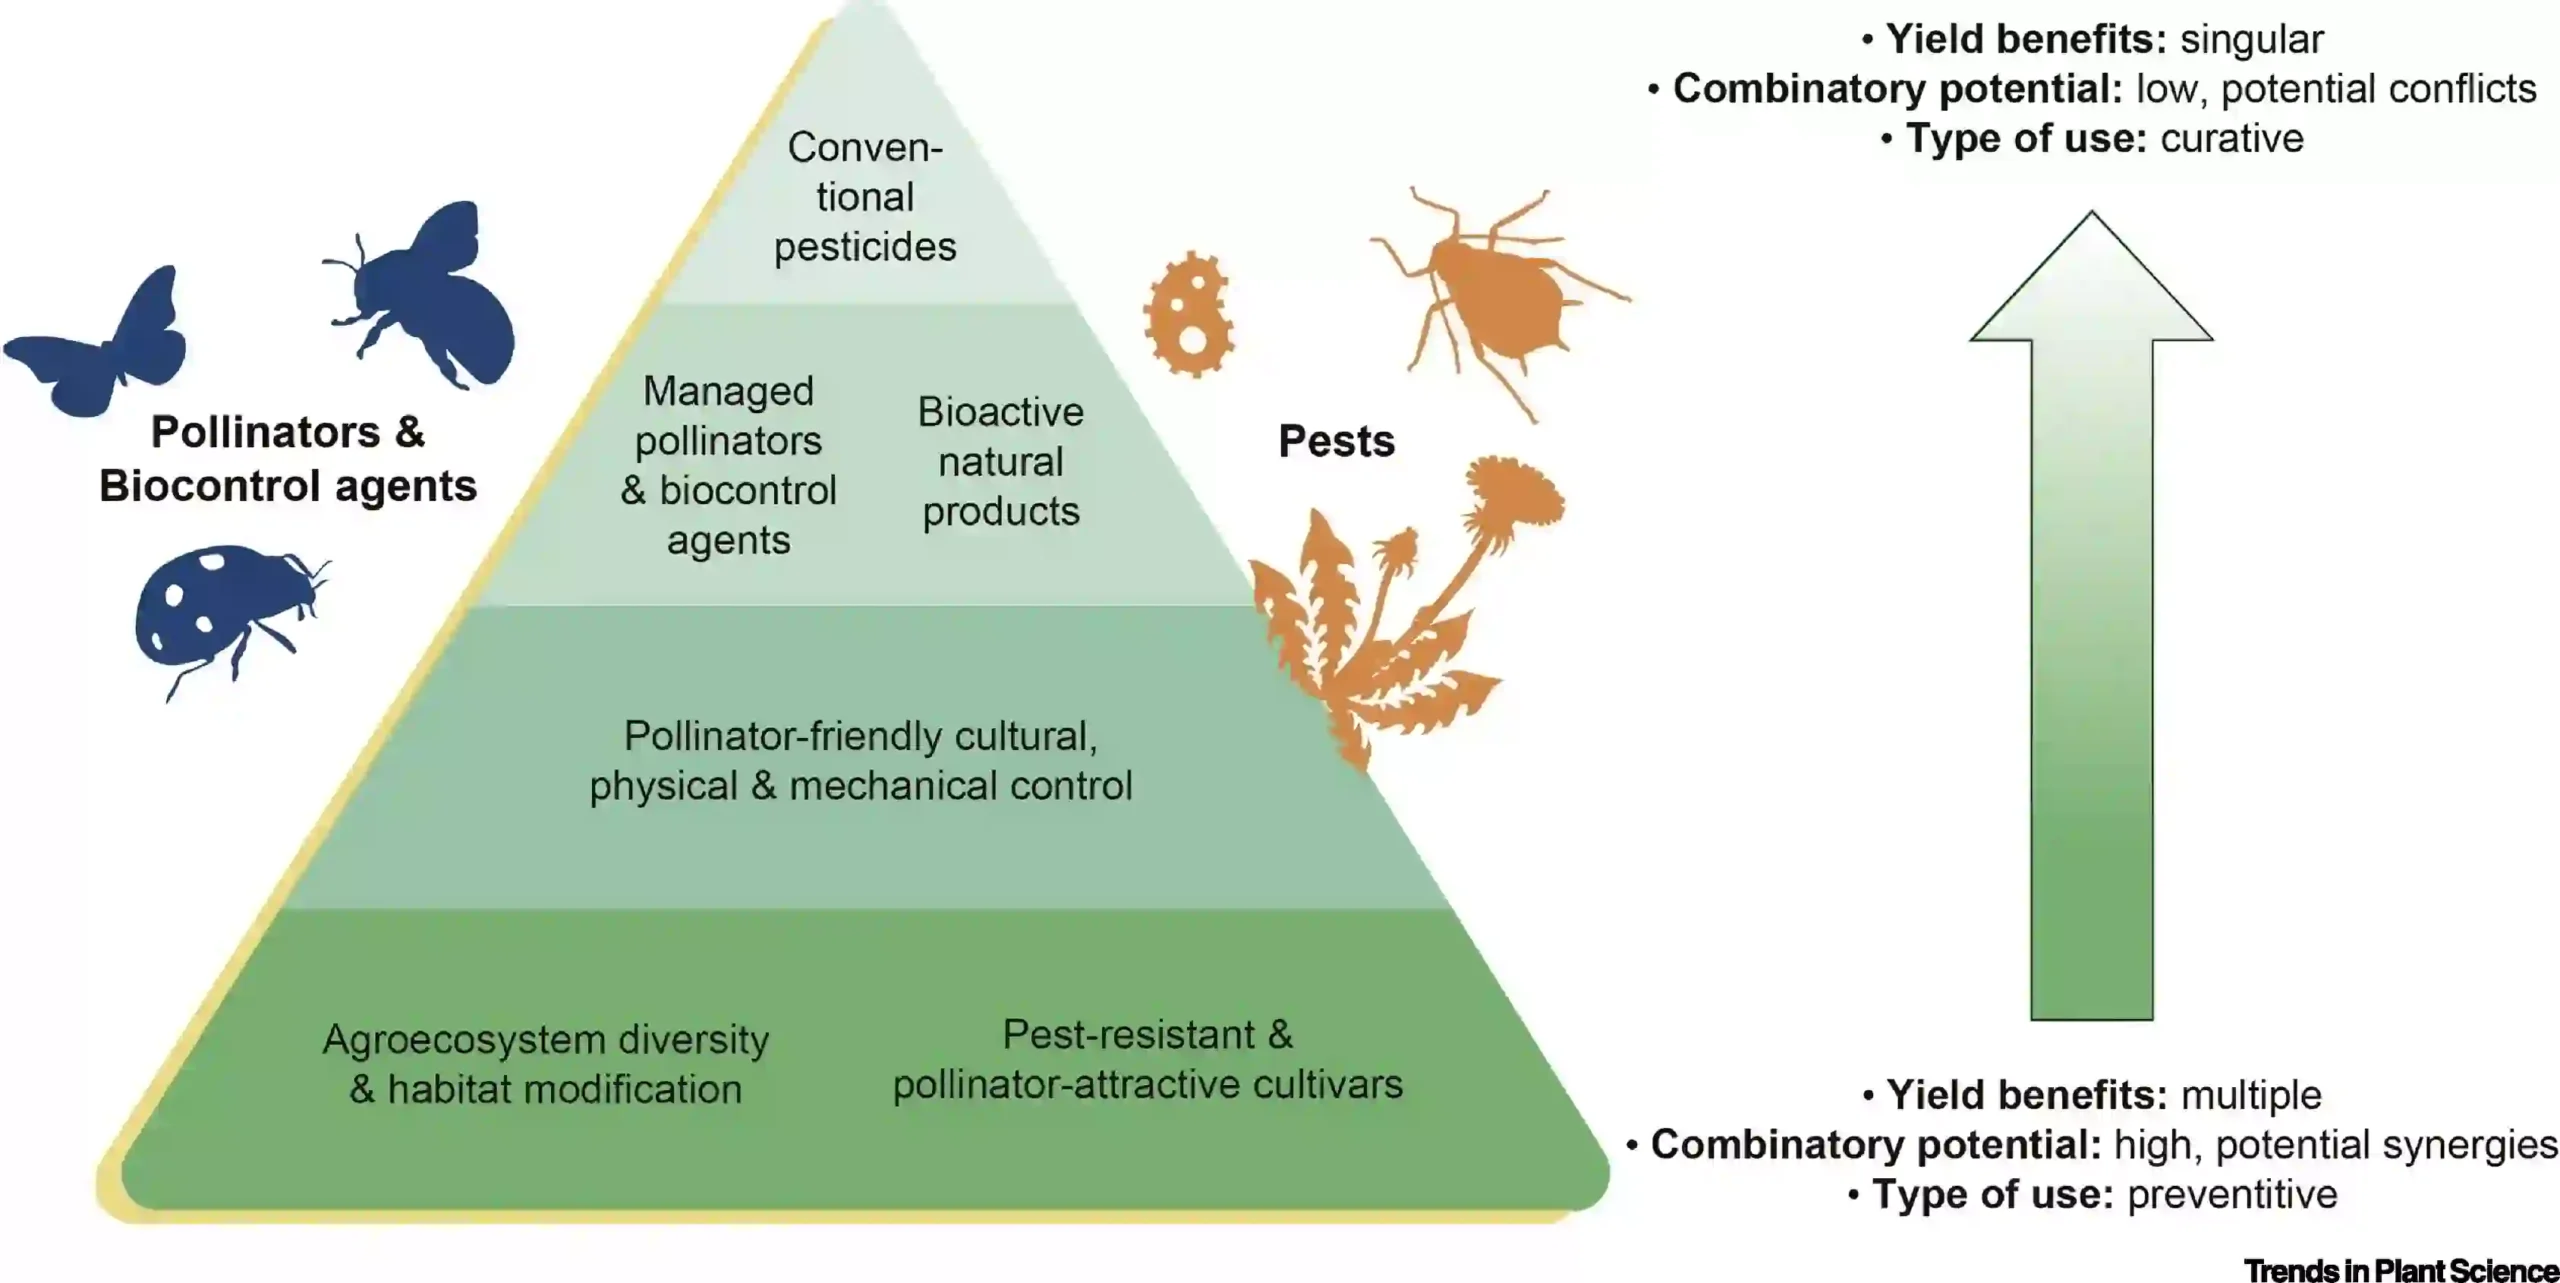 The Effects of Pesticides on Pollinators and Ecological Balance